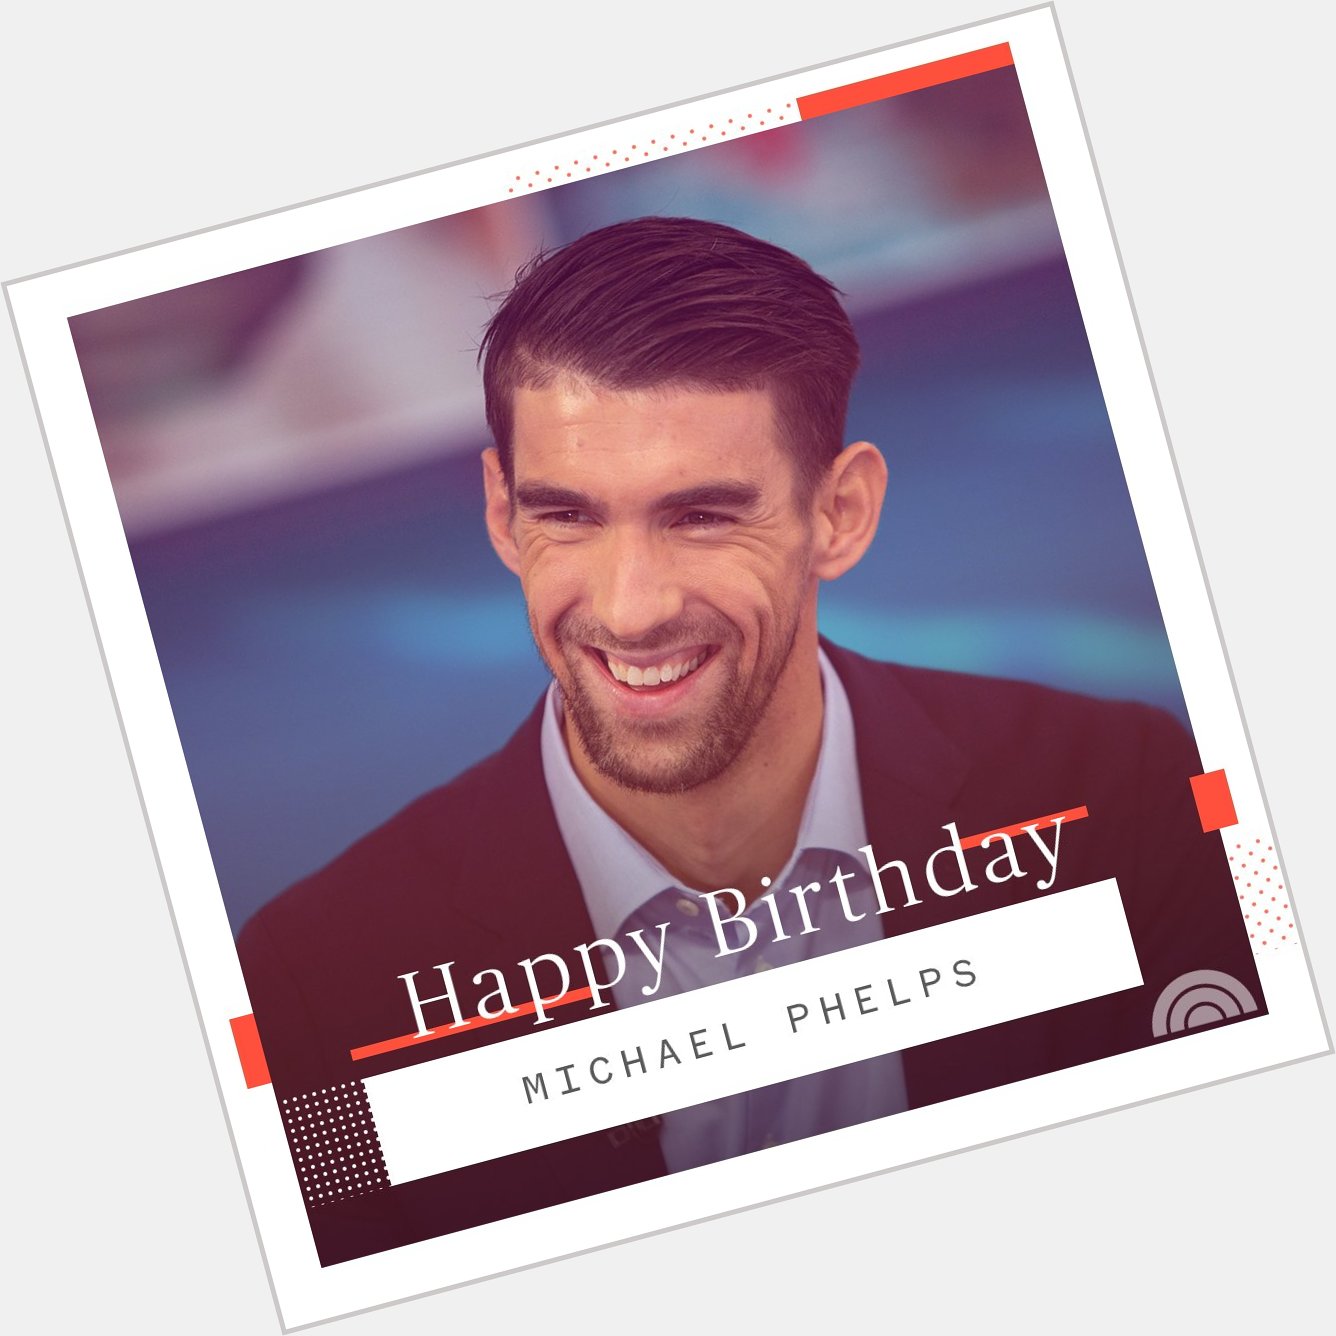 Happy birthday to the most decorated Olympian of all time, Michael Phelps! 